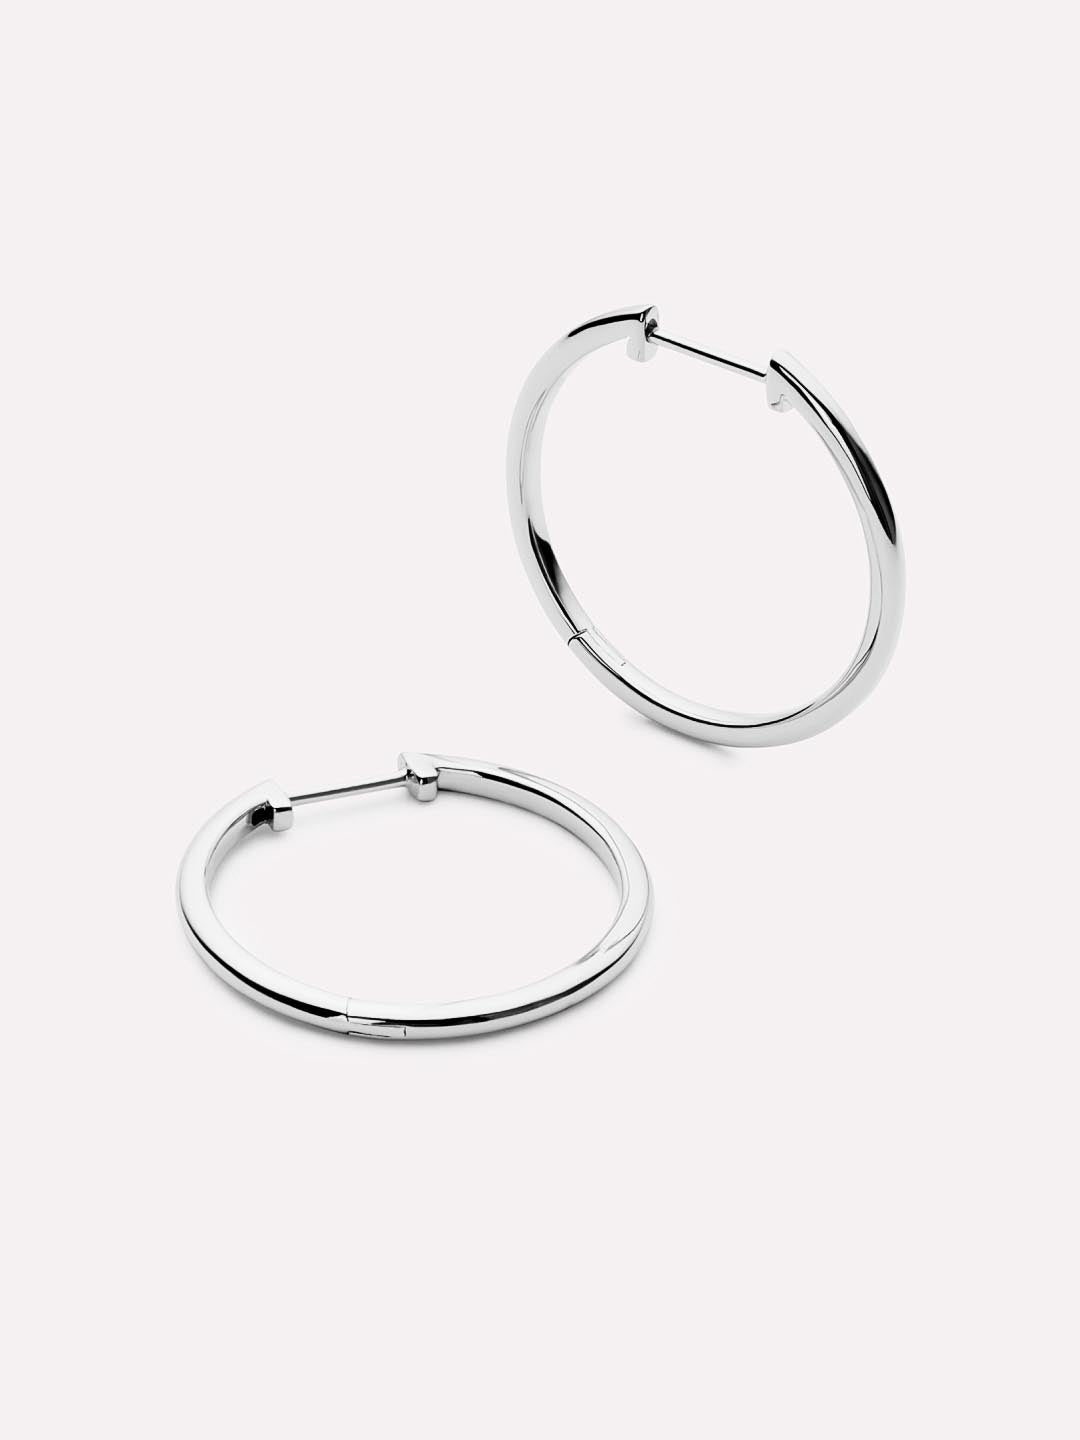 Small Slim Endless Hoops - Lo Small Silver | Ana Luisa Jewelry